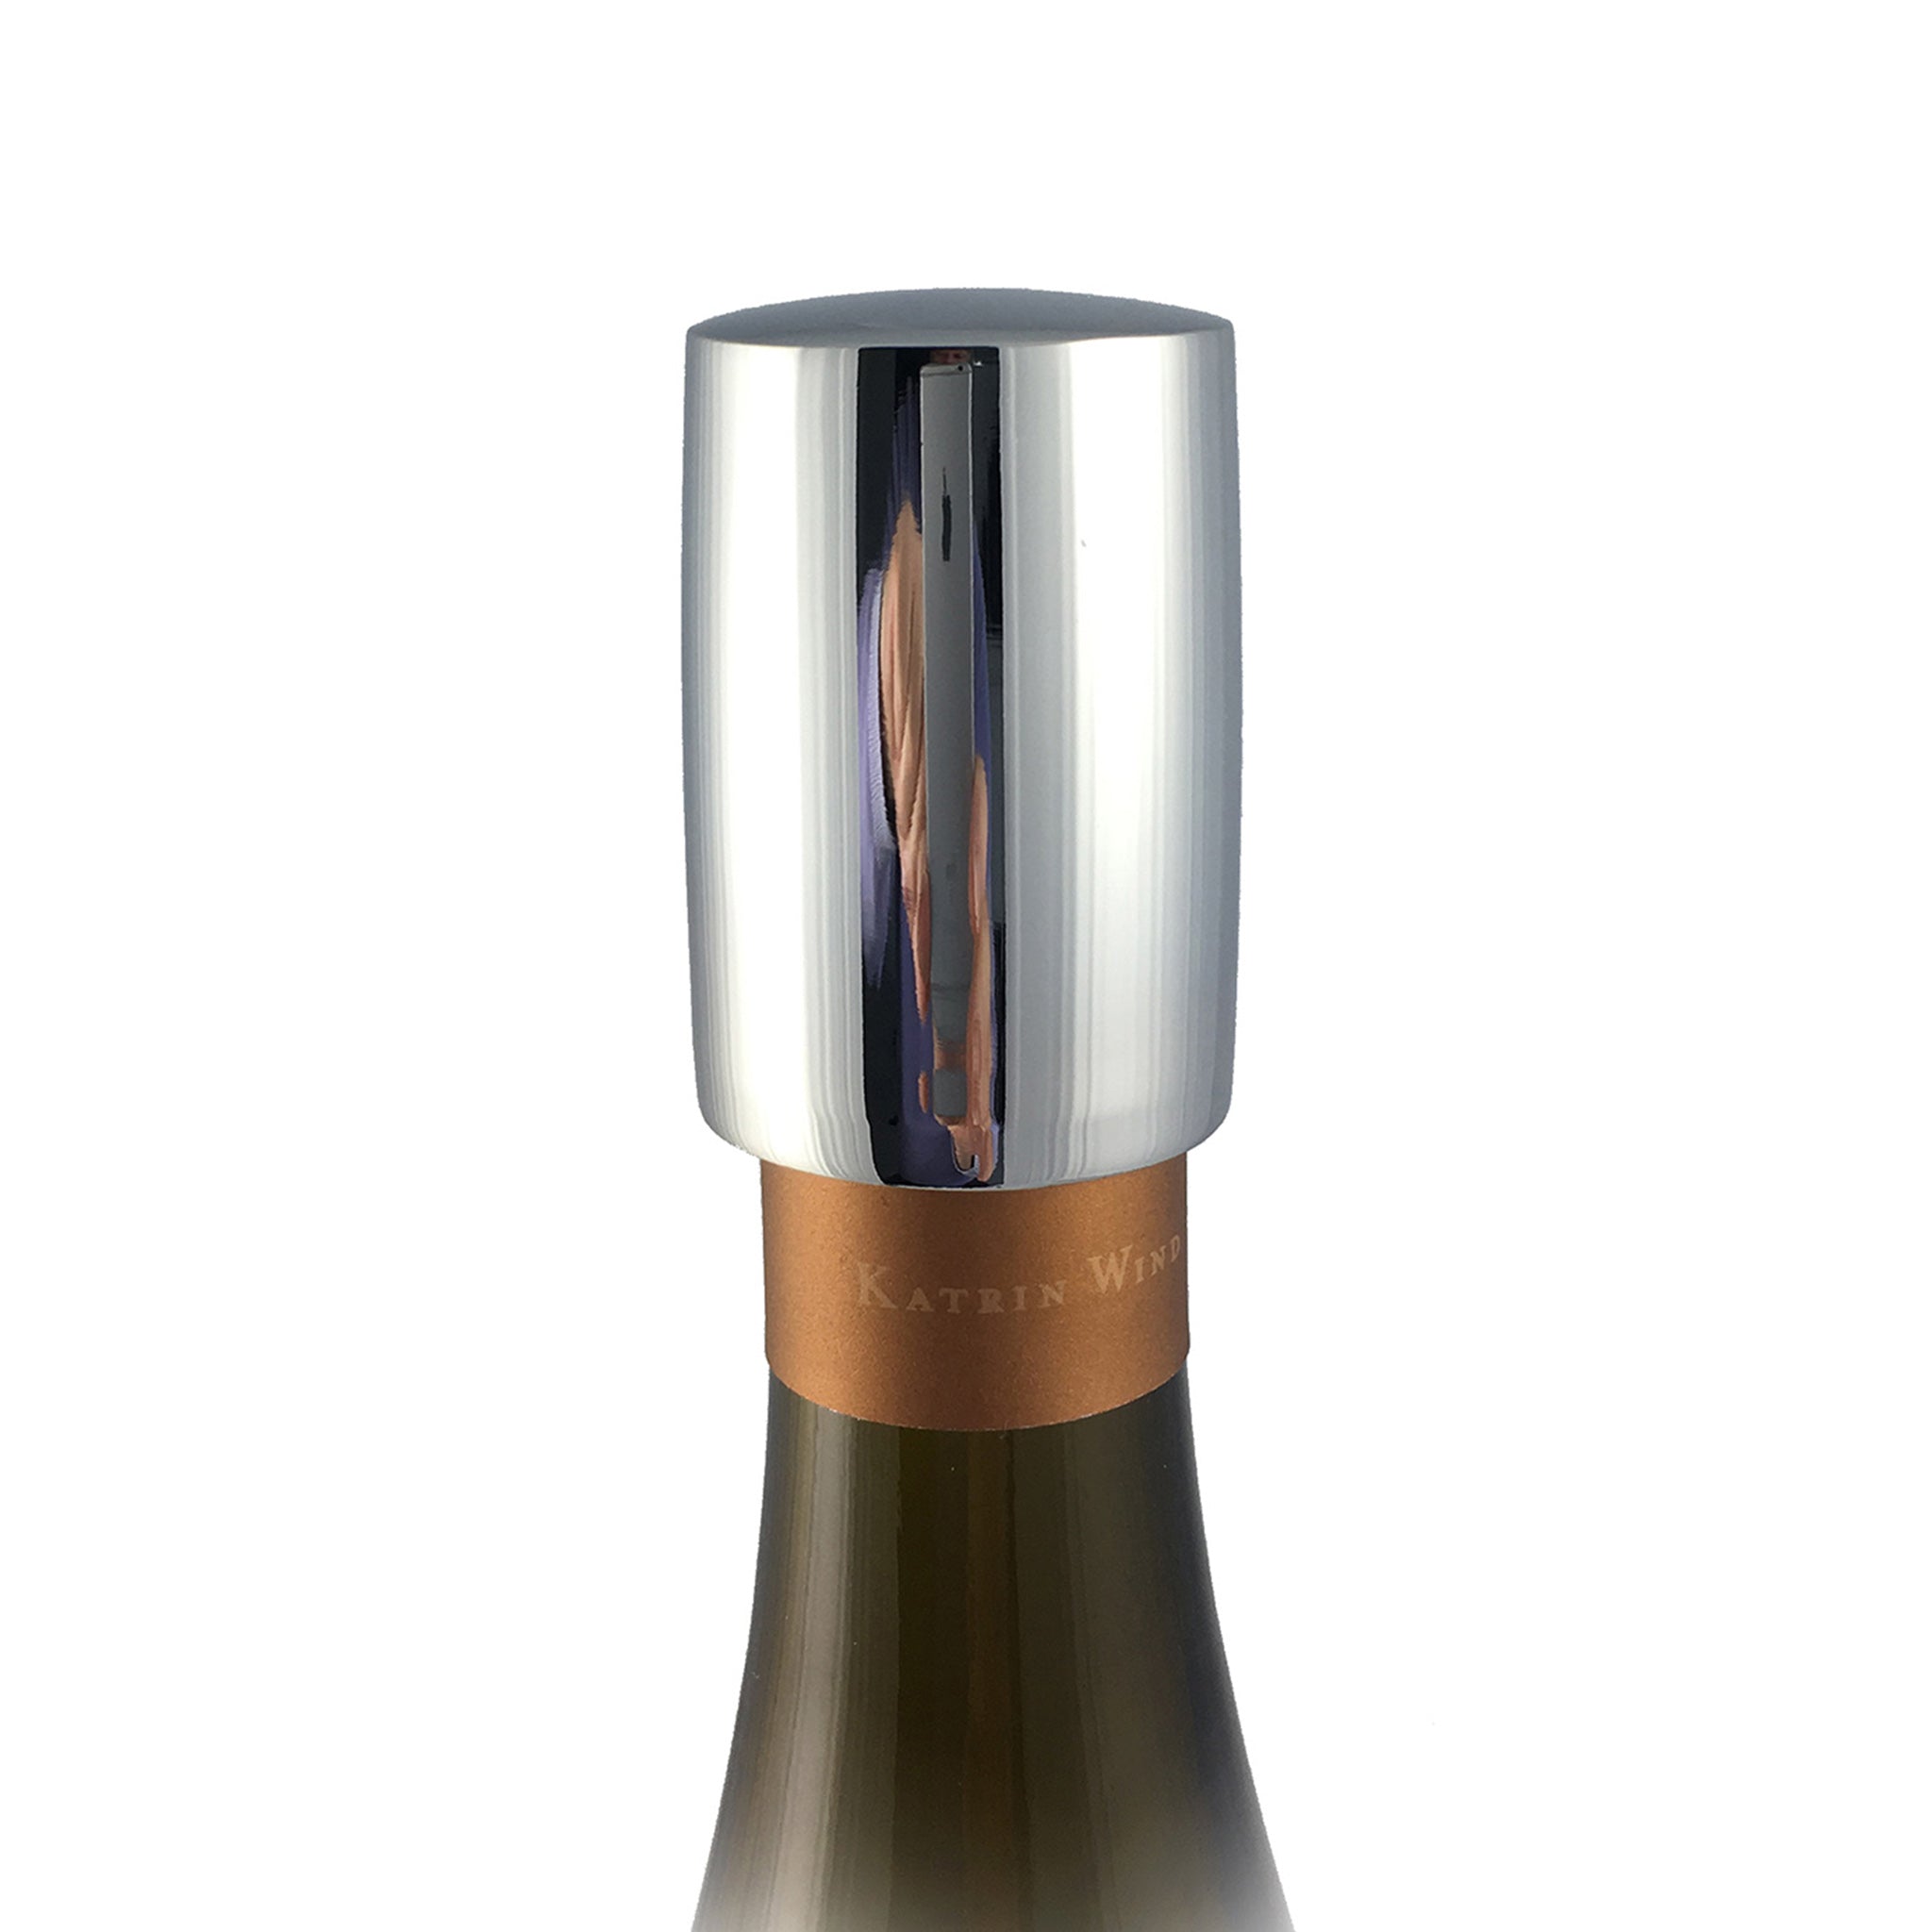 Vagnbys® Wine Stopper by Ethan+Ashe